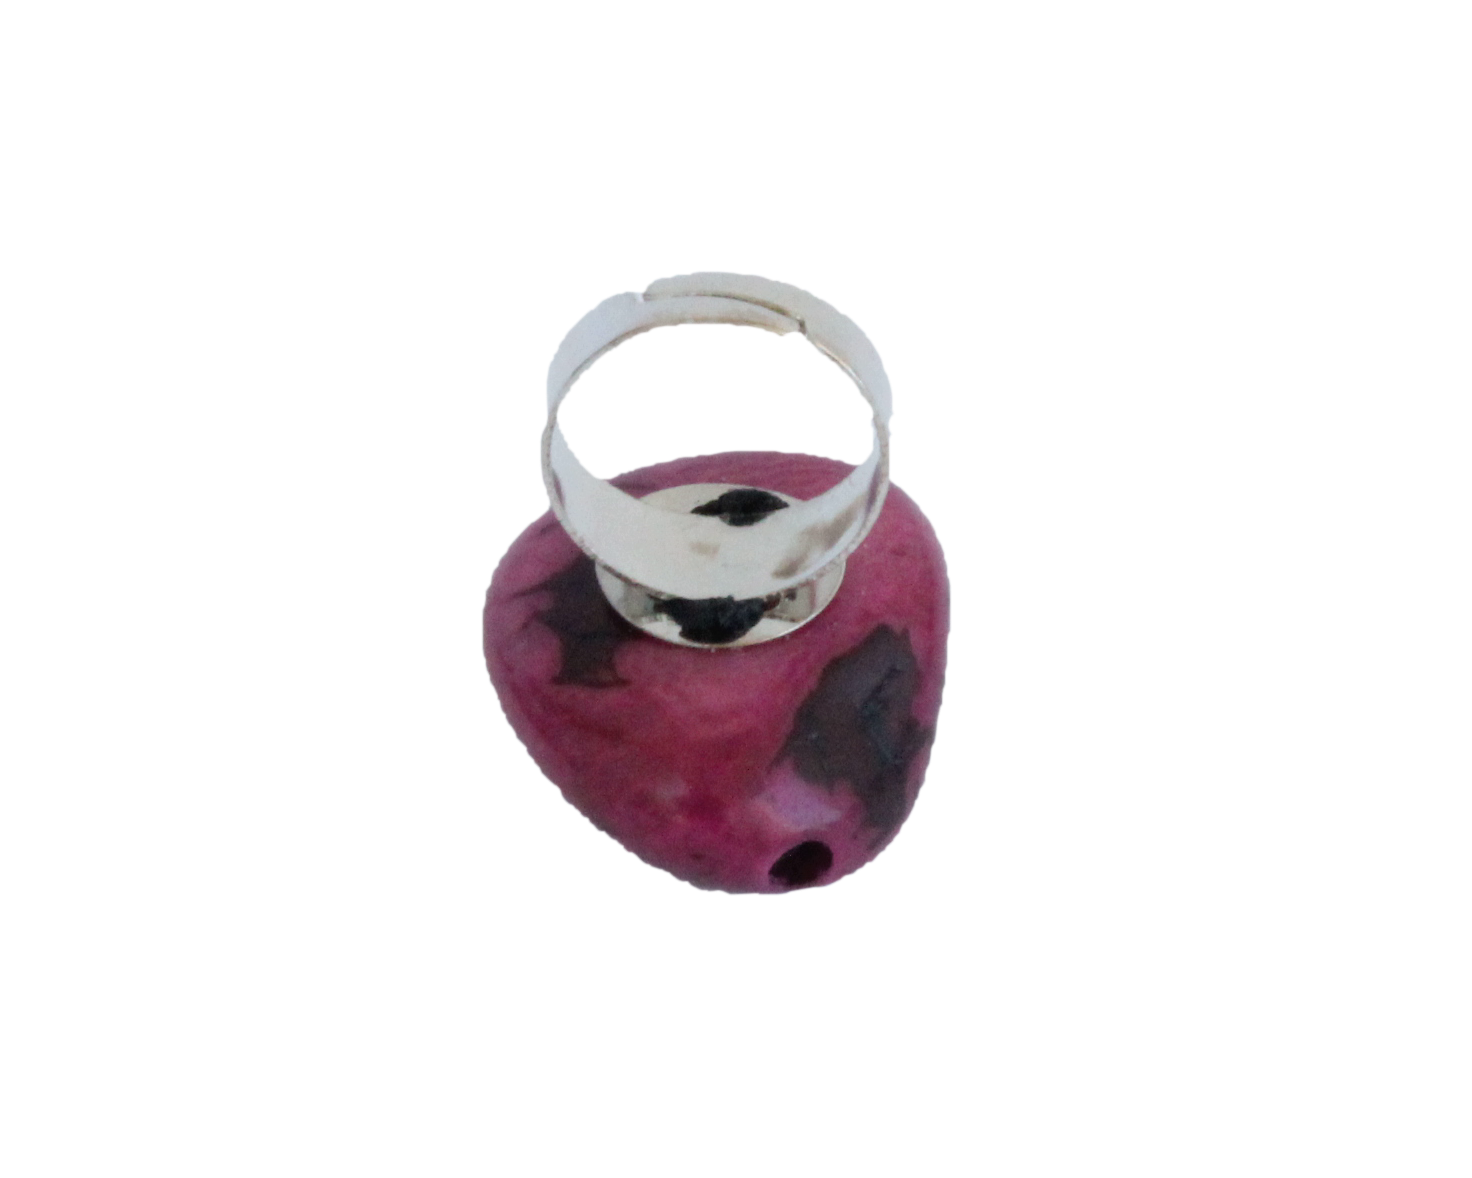 Handmade ring, tagua, pink, adjustable ring size, sustainable, ethical, back